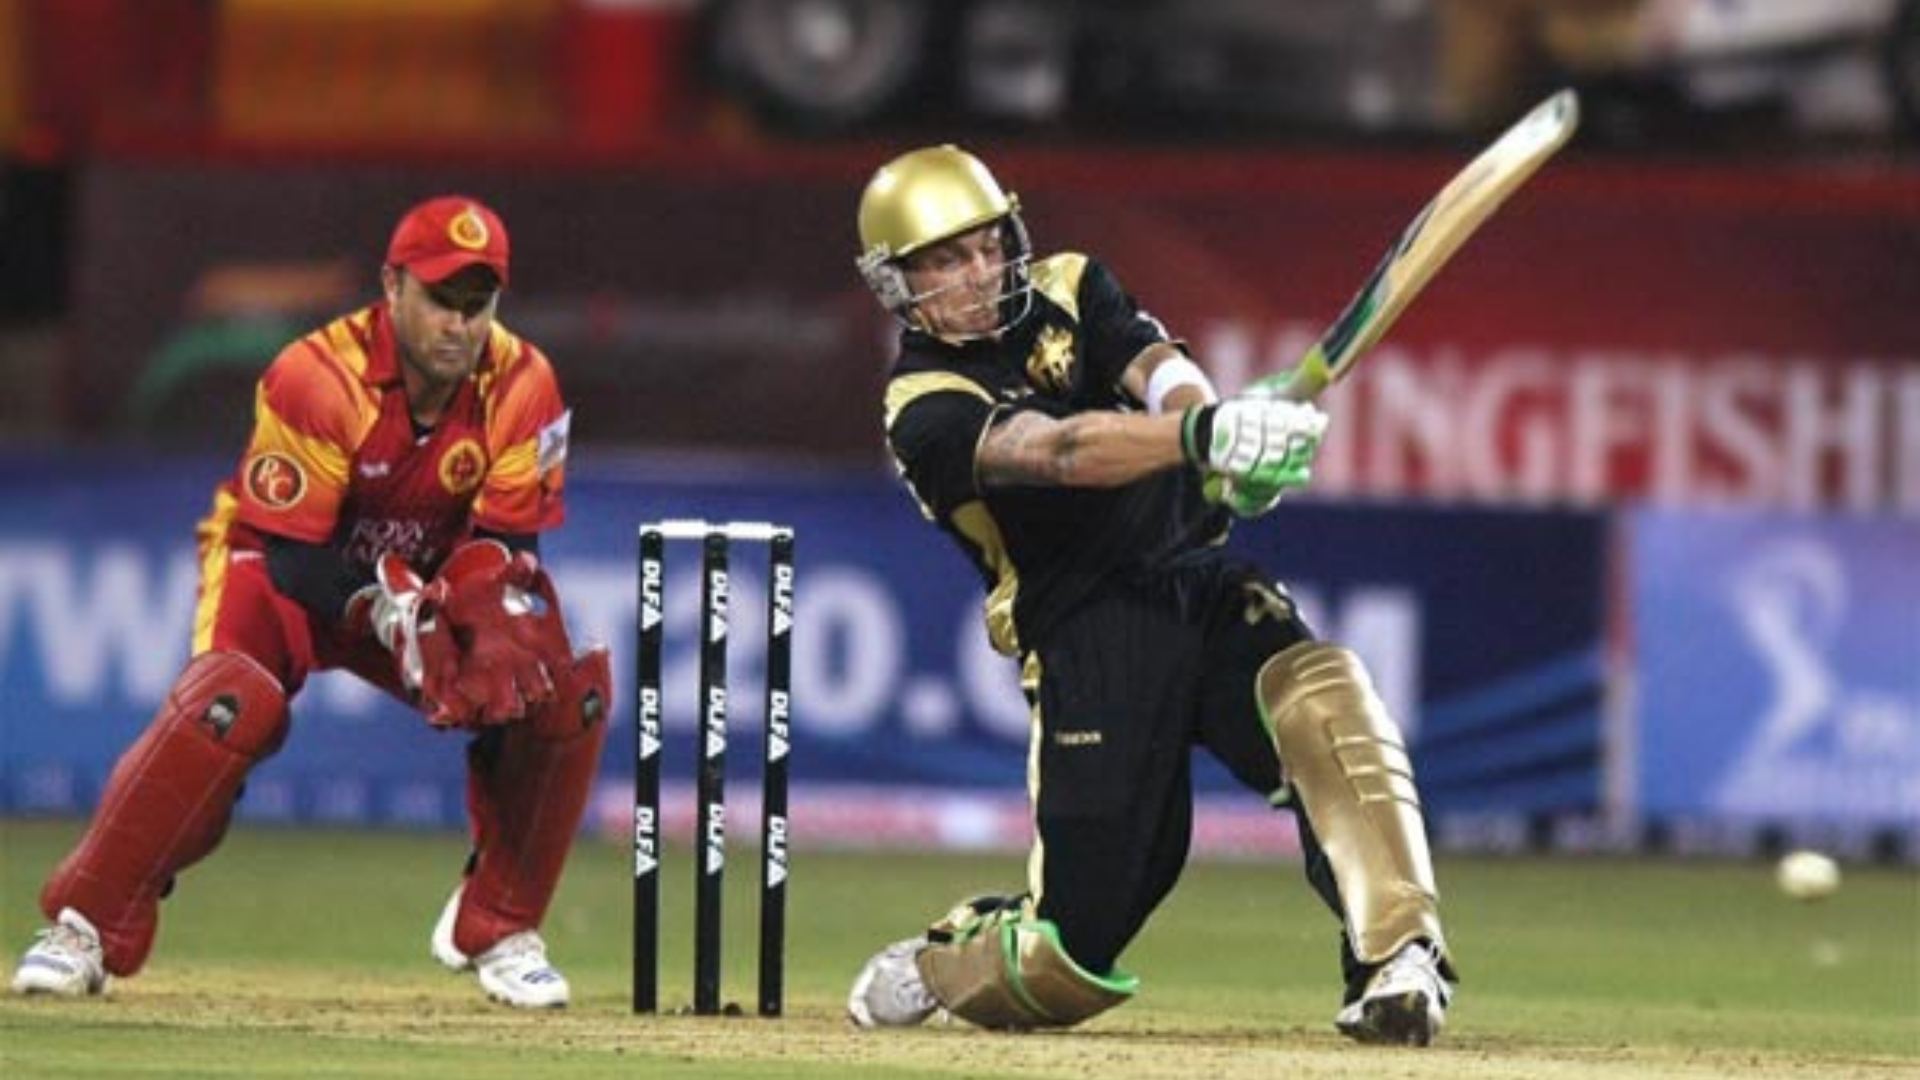 Brendon McCullum's 158 in the first game of IPL 2008 changed world cricket forever.